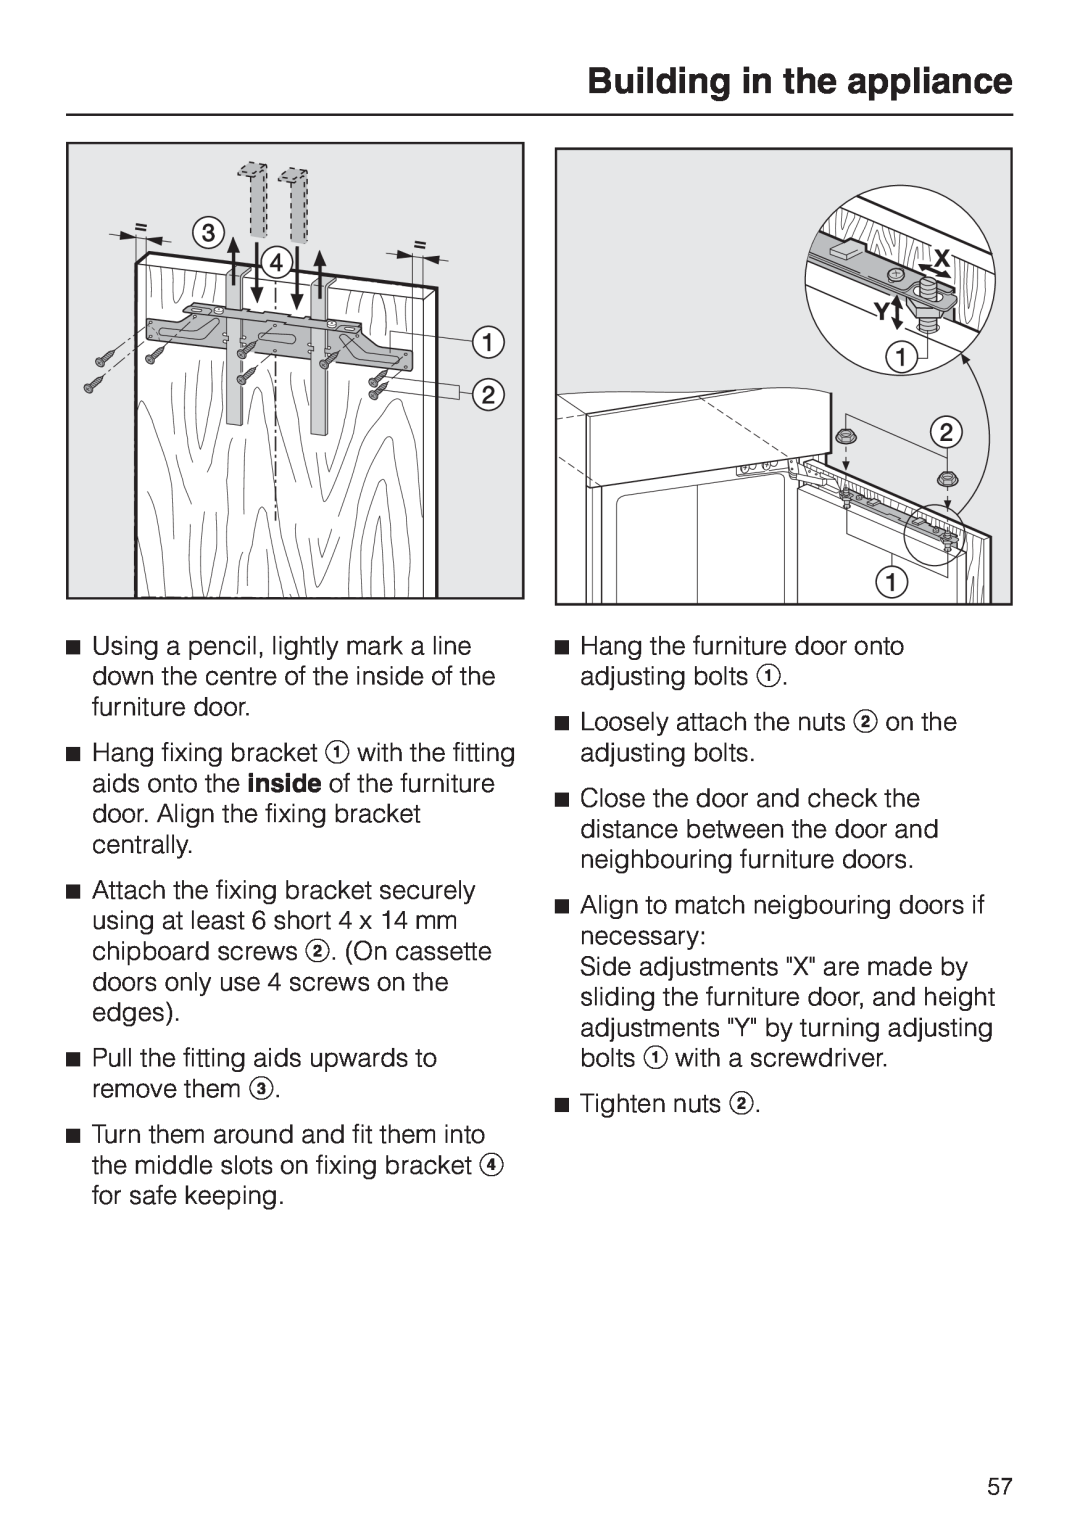 Miele KF 9757 ID installation instructions Building in the appliance, Pull the fitting aids upwards to remove them c 